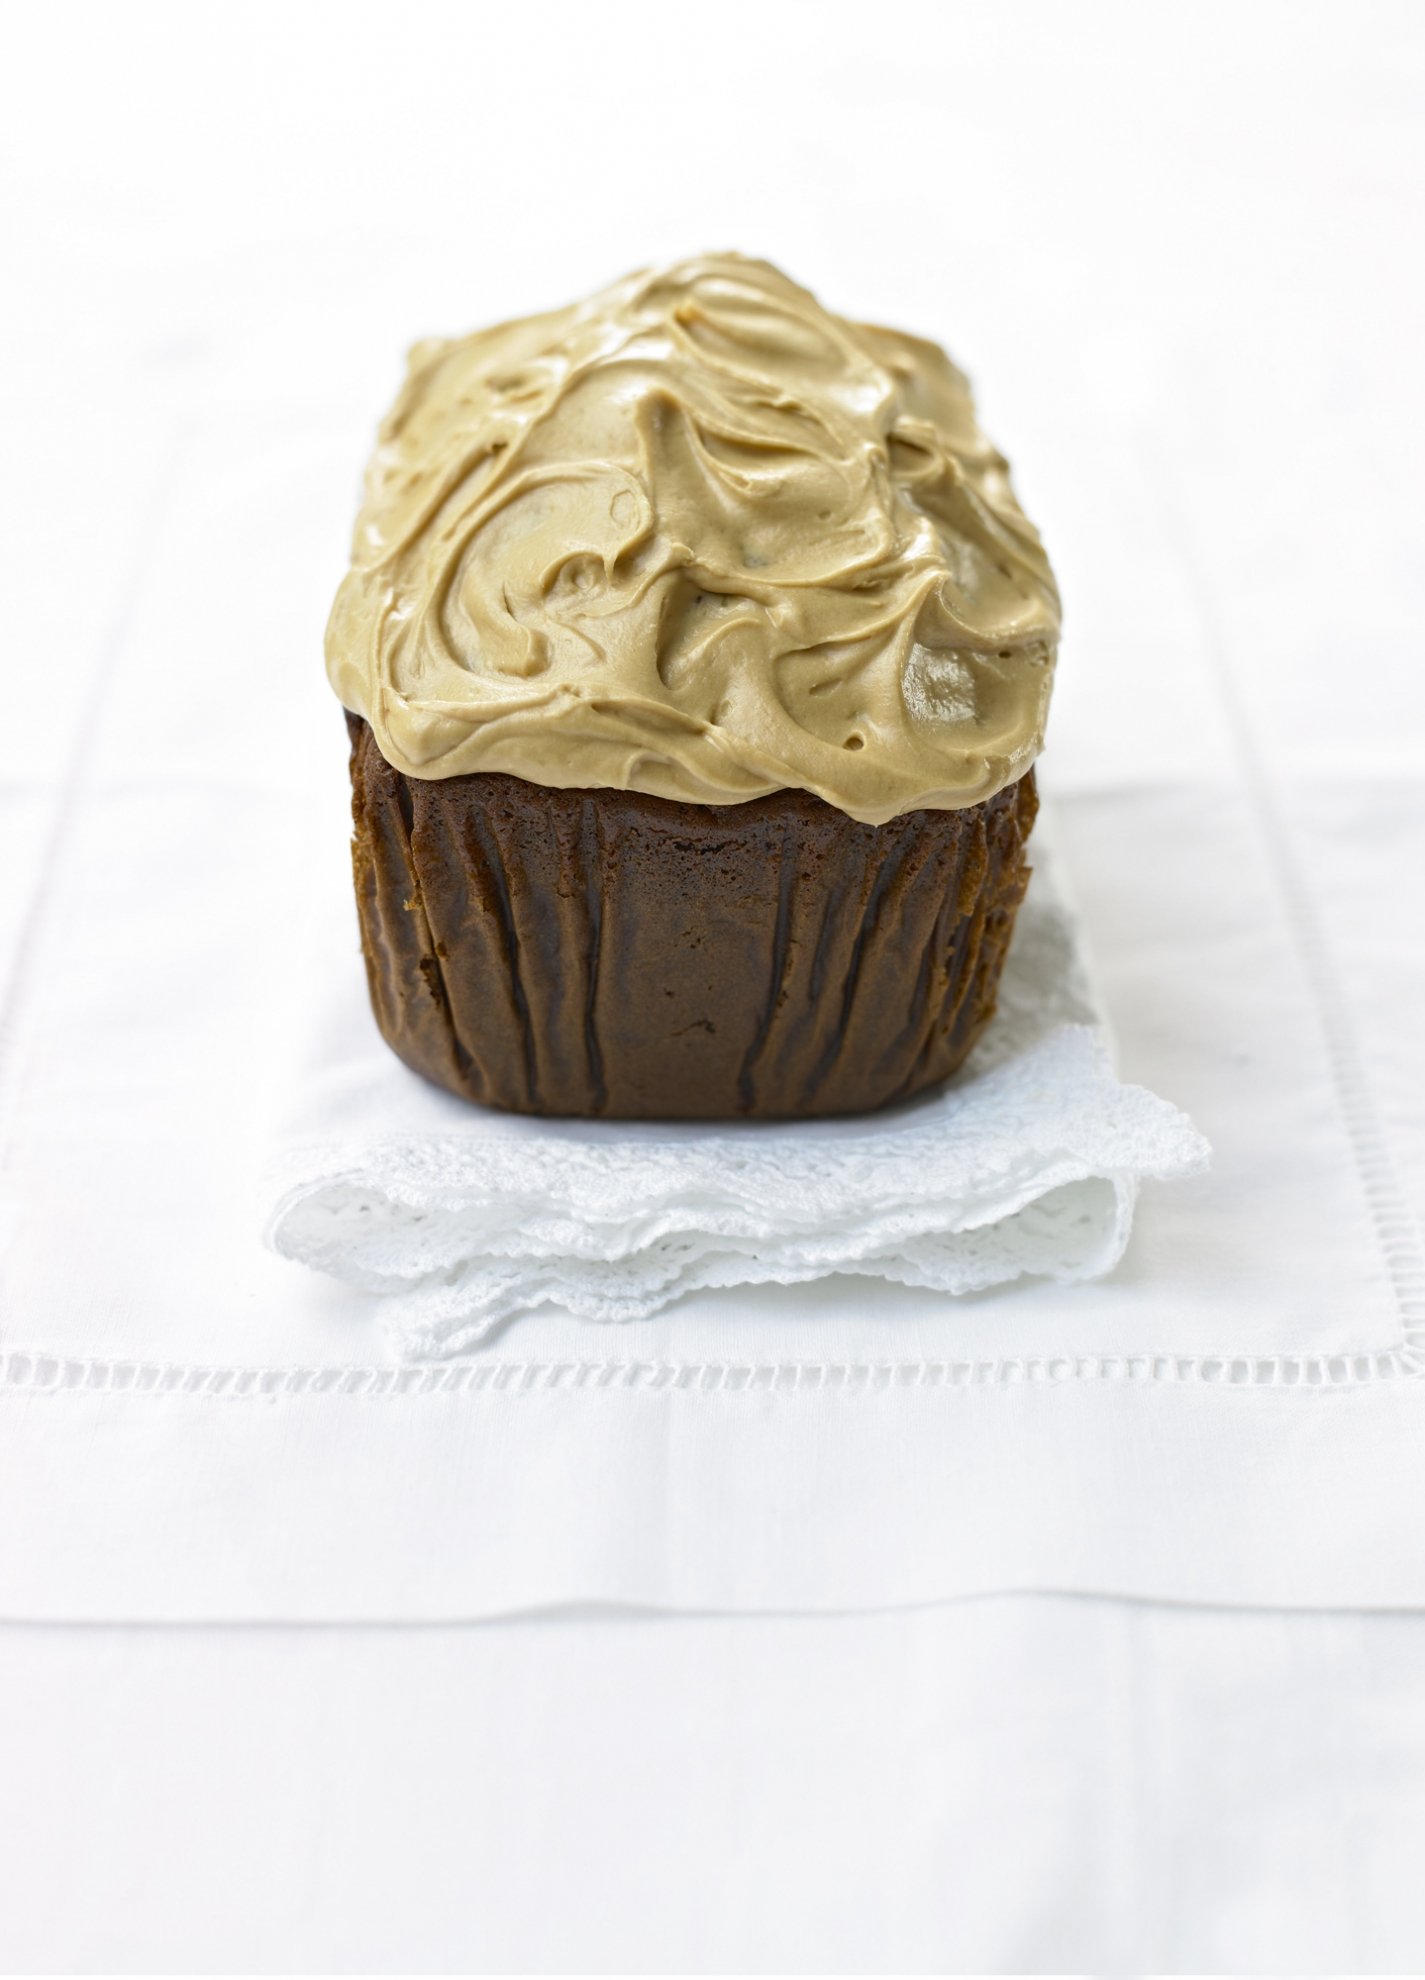 Where can you find recipes for caramel icing online?